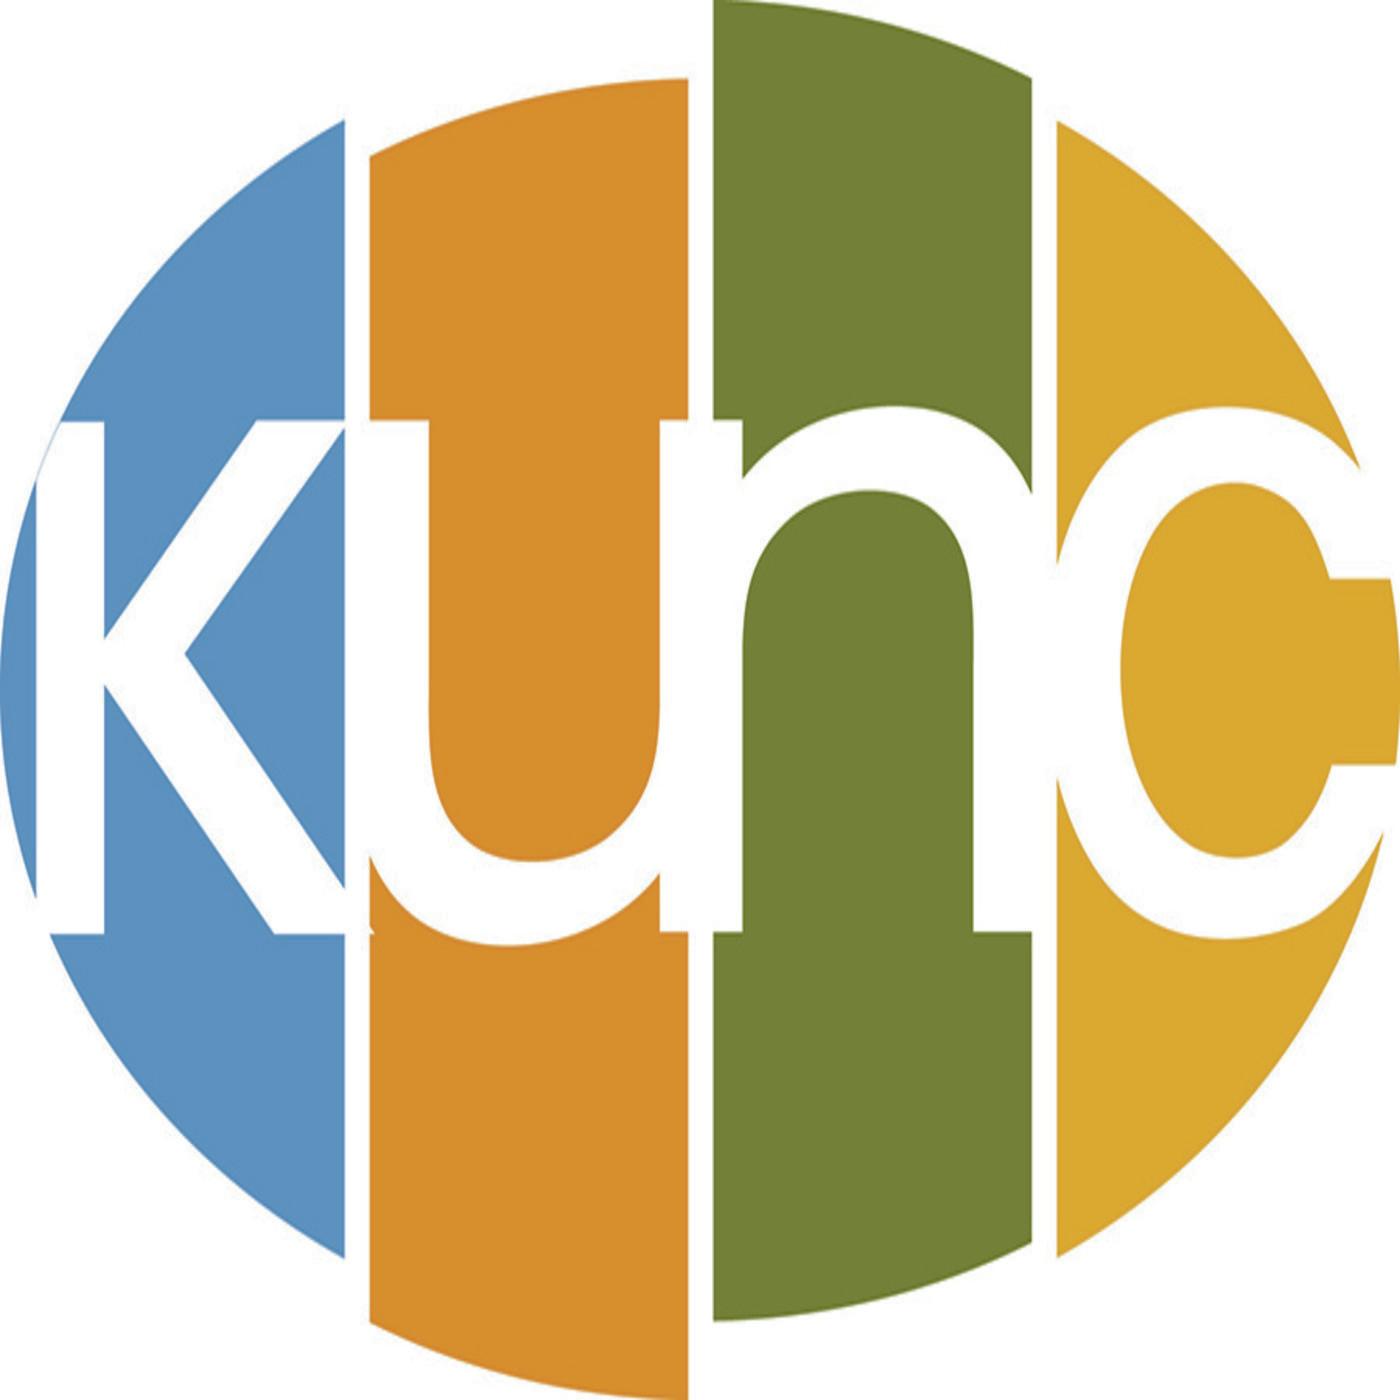 OFFICIAL USE KUNC LOGO_cropped